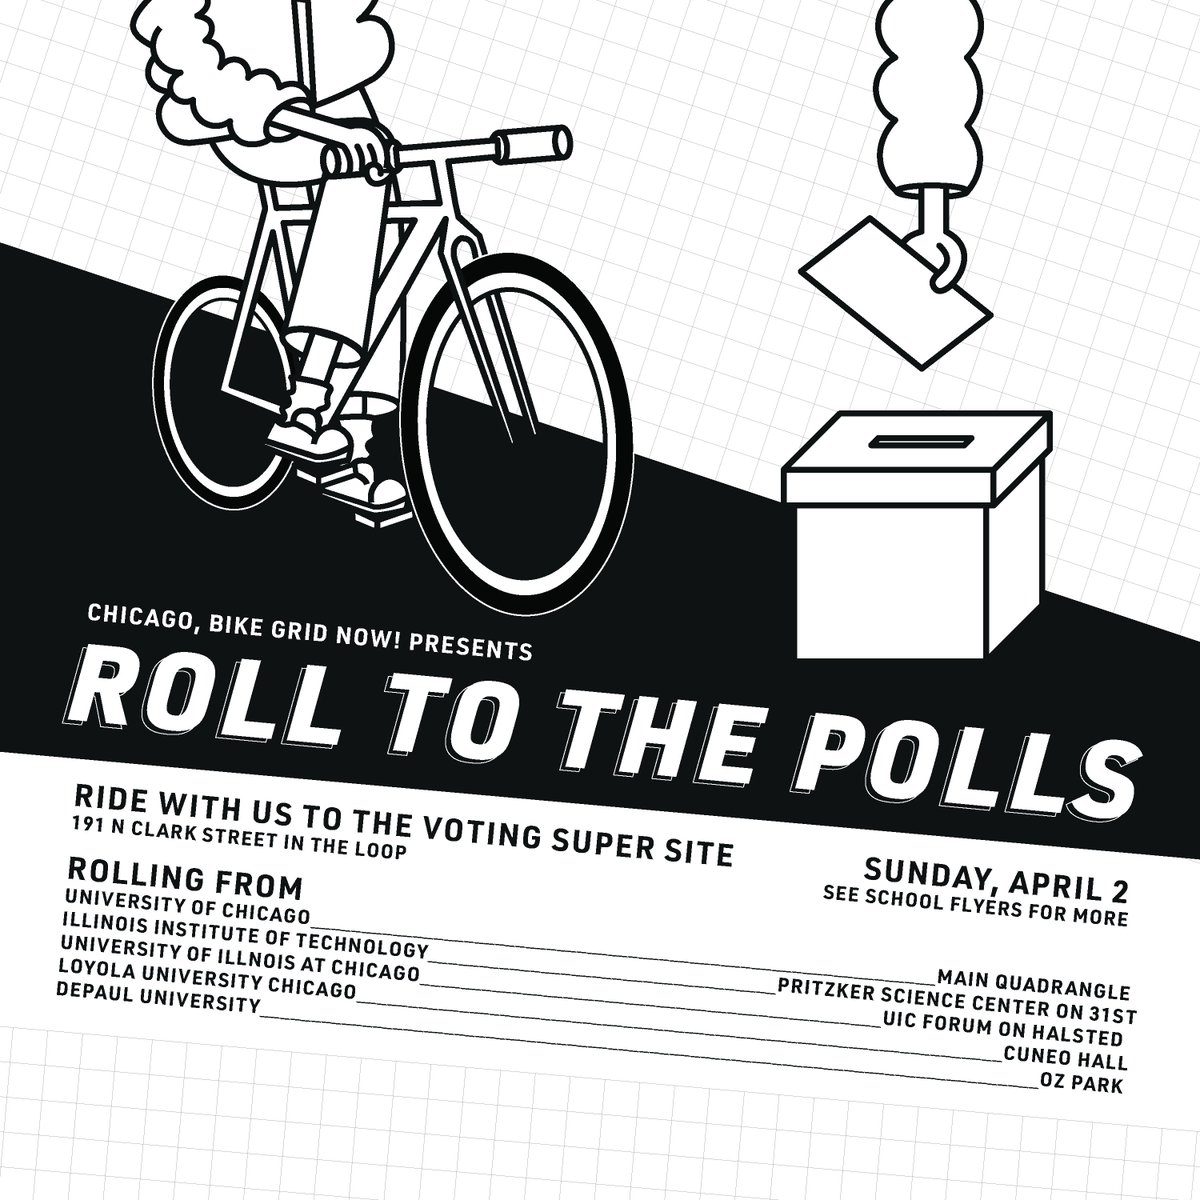 College students and neighbors: Join us Sunday April 2 as we Roll to the Polls for the Chicago Mayoral Election! We will be rolling from @UniversityofChicago @Loyola @lIT @DePaul & @UIC to the Supersite downtown where you can register and vote. See flyers for meetup/roll times...